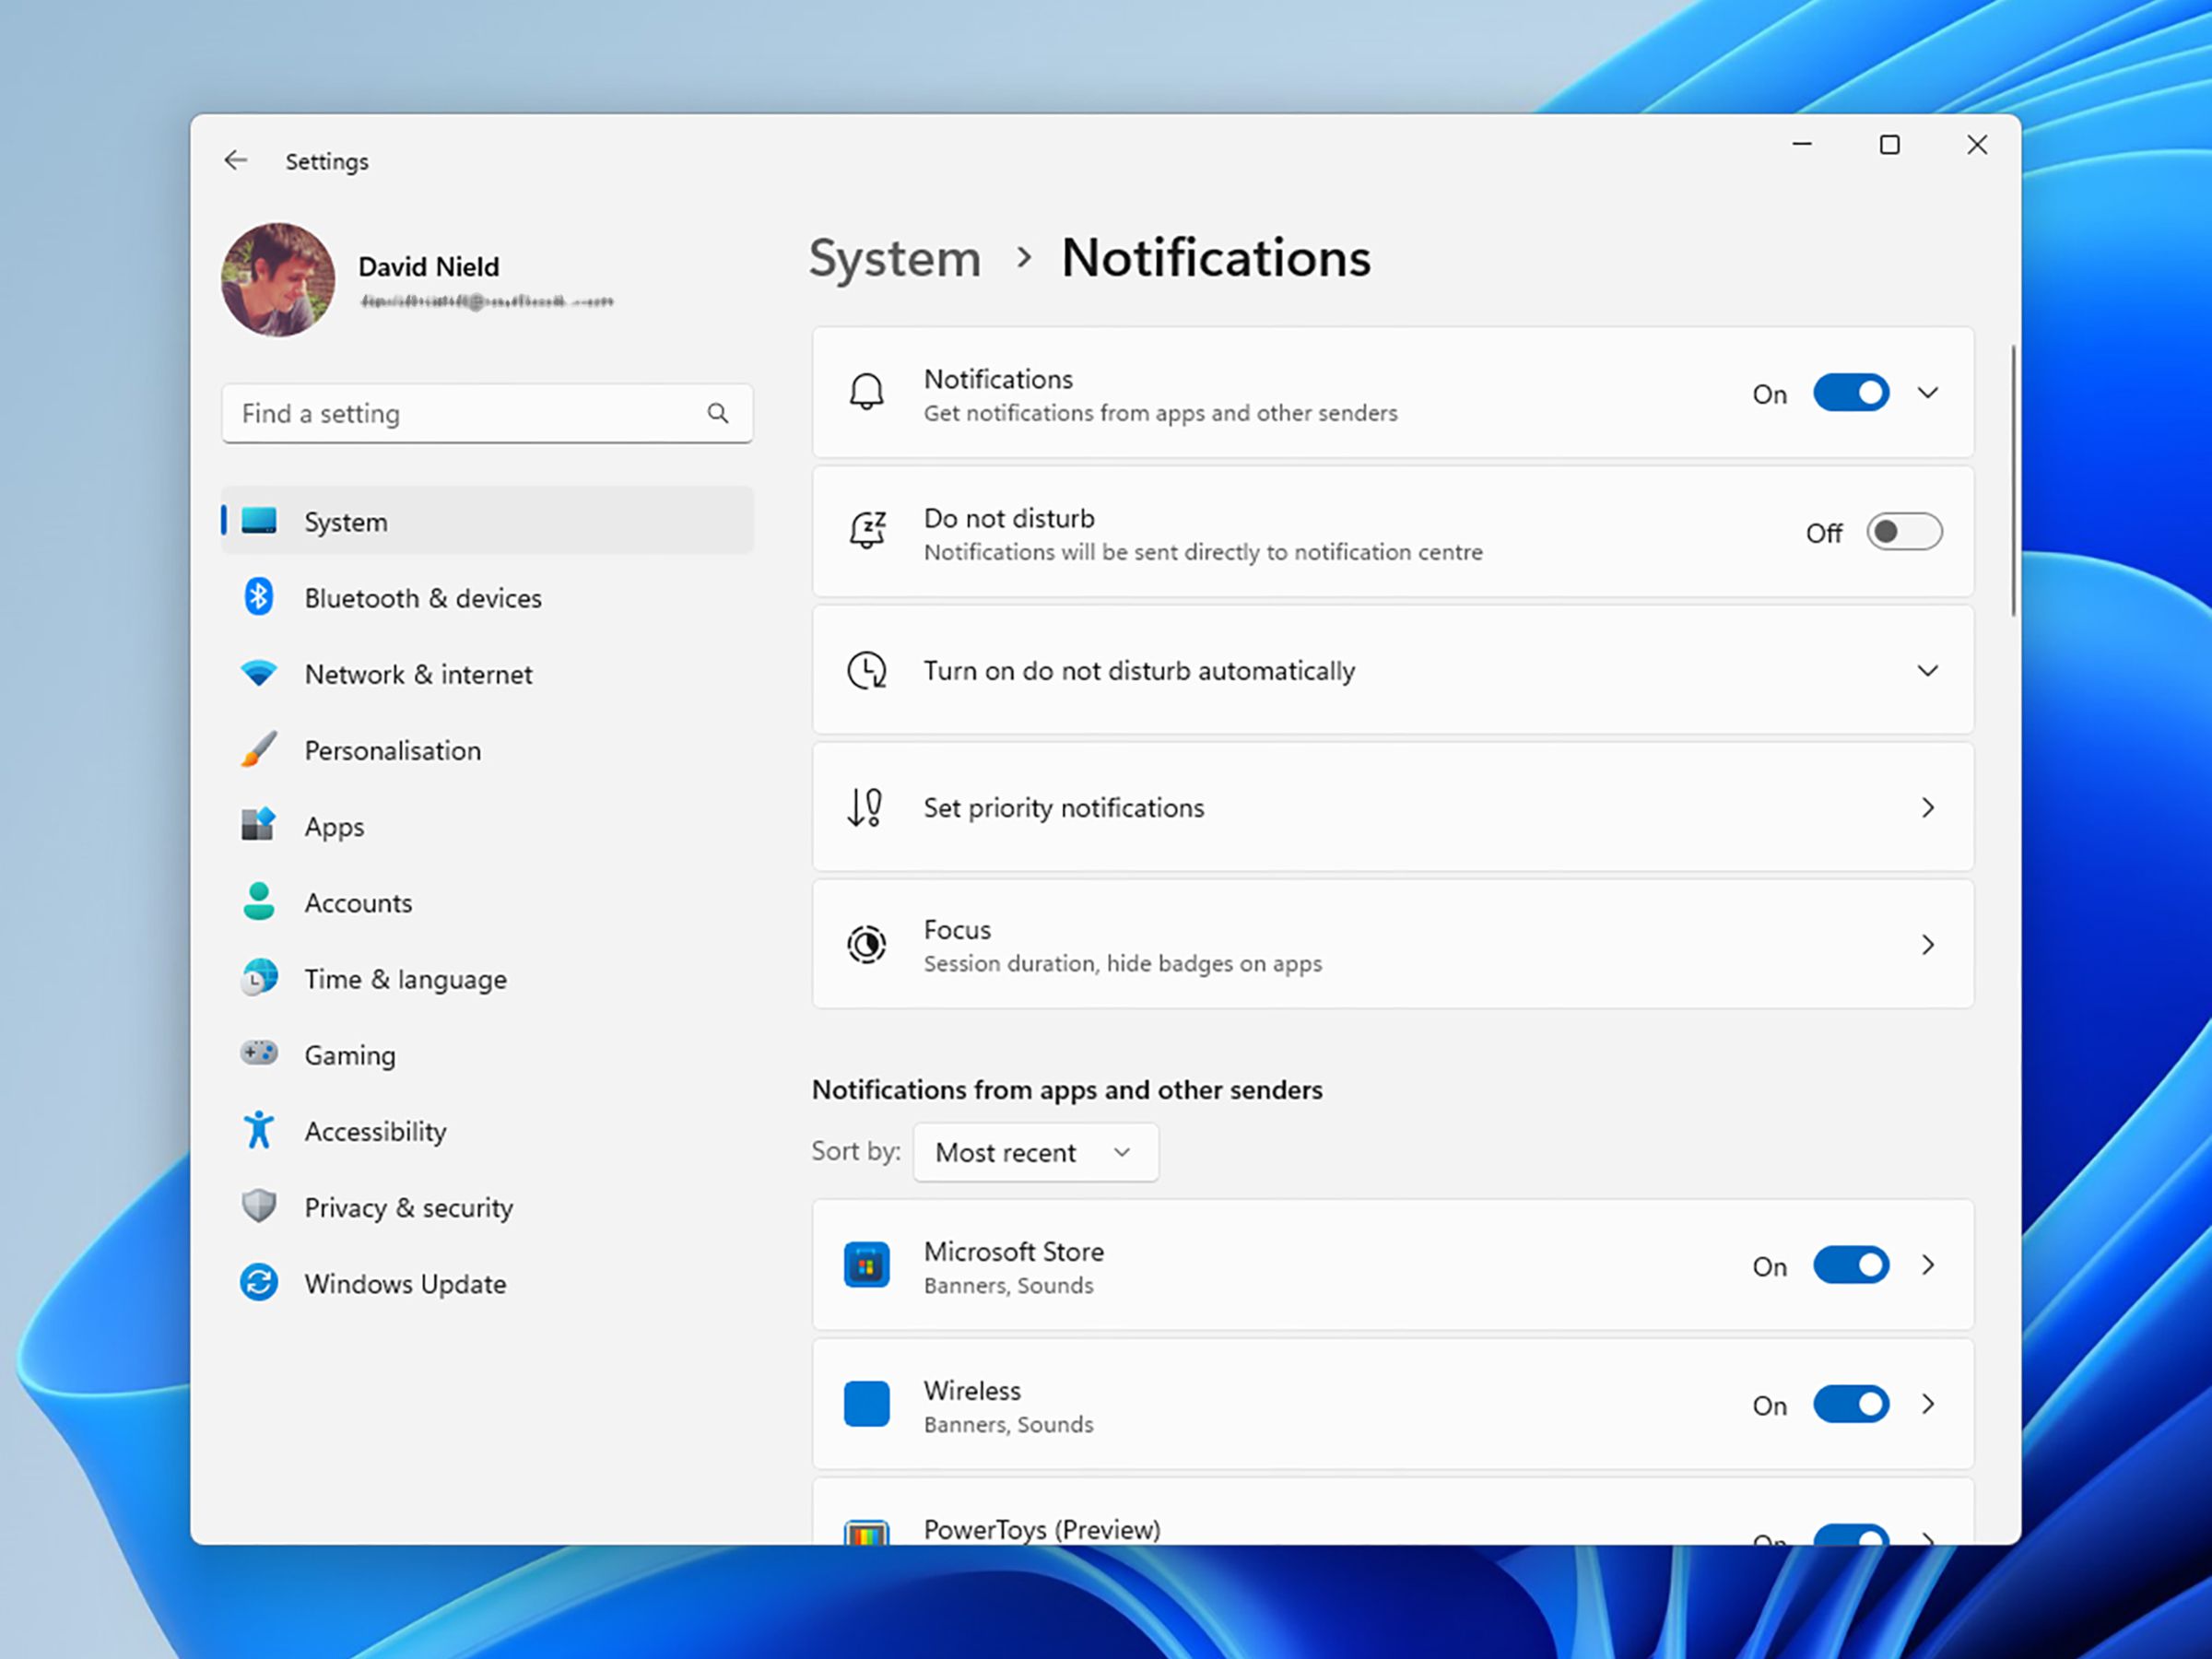 Systems > Notifications page on Windows, with menu list in left column and various features running down the center.